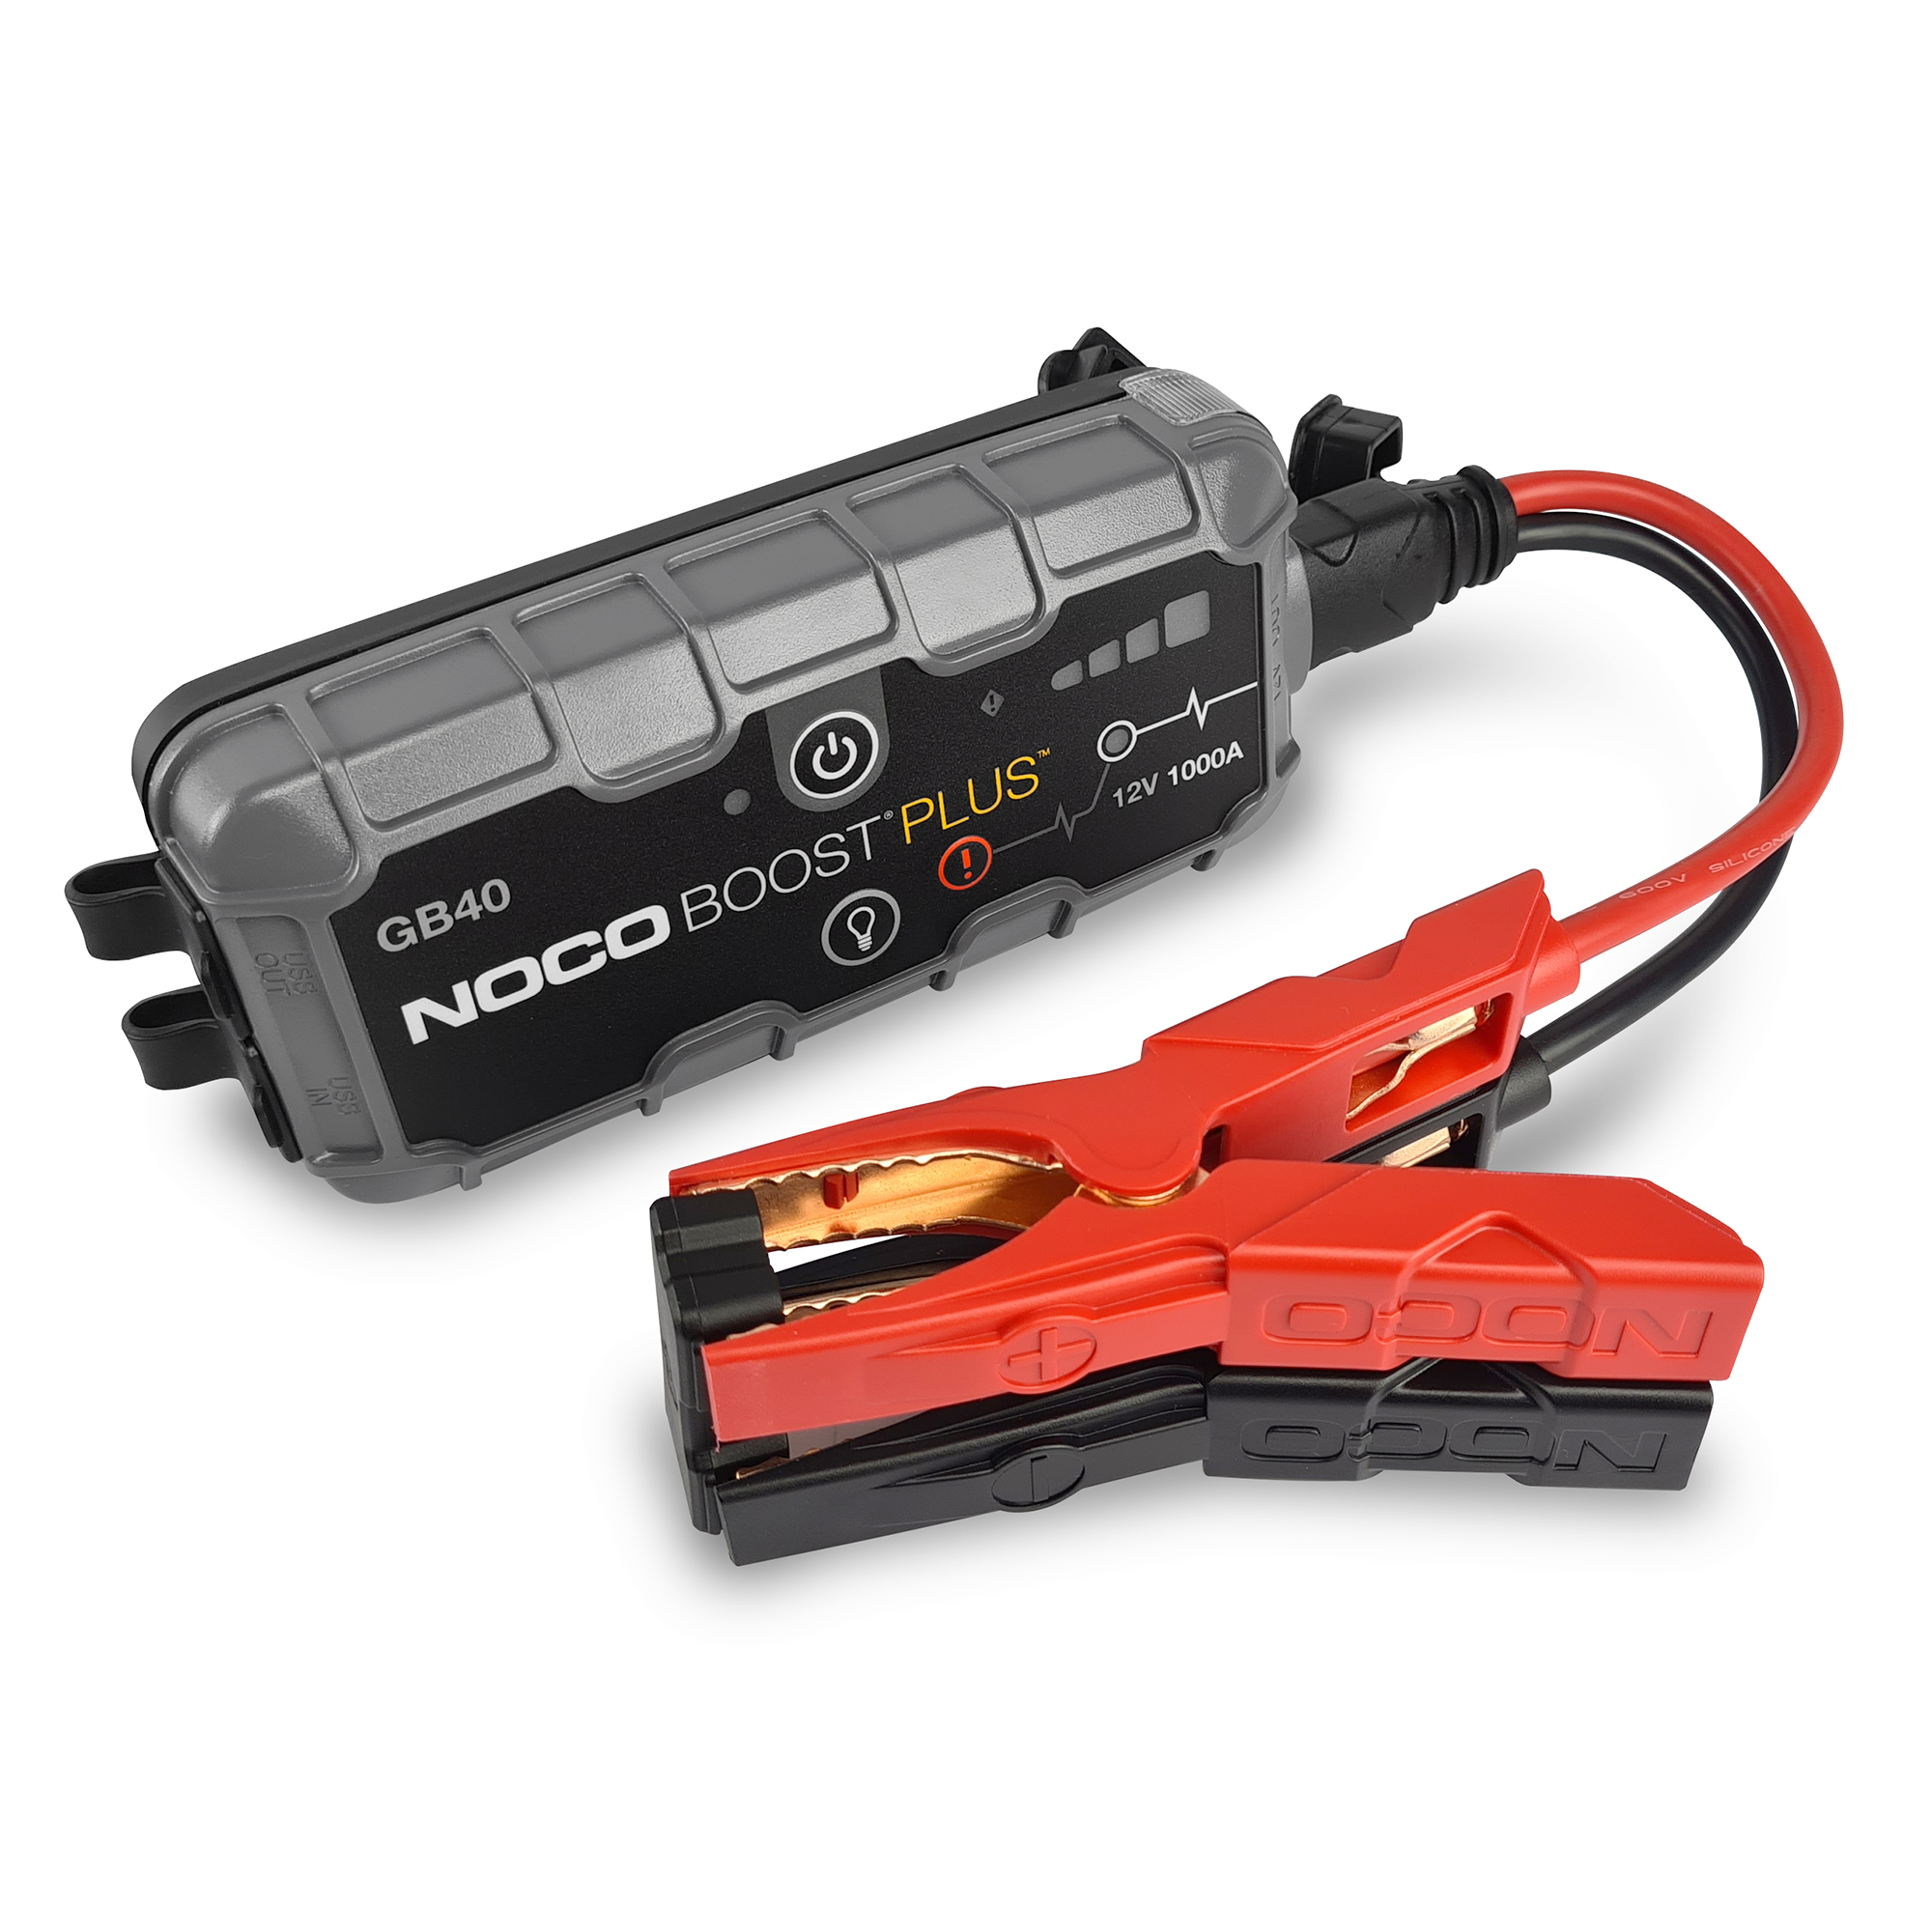 NOCO Plus GB40 1000A Lithium Jump Starter / Powerbank :: £118.75 ::  Motorcycle Accessories :: BATTERY CARE :: WHATEVERWHEELS LTD - ATV,  Motorbike & Scooter Centre - Lancashire's Best For Quad, Buggy, 50cc &  125cc Motorcycle and Moped Sale